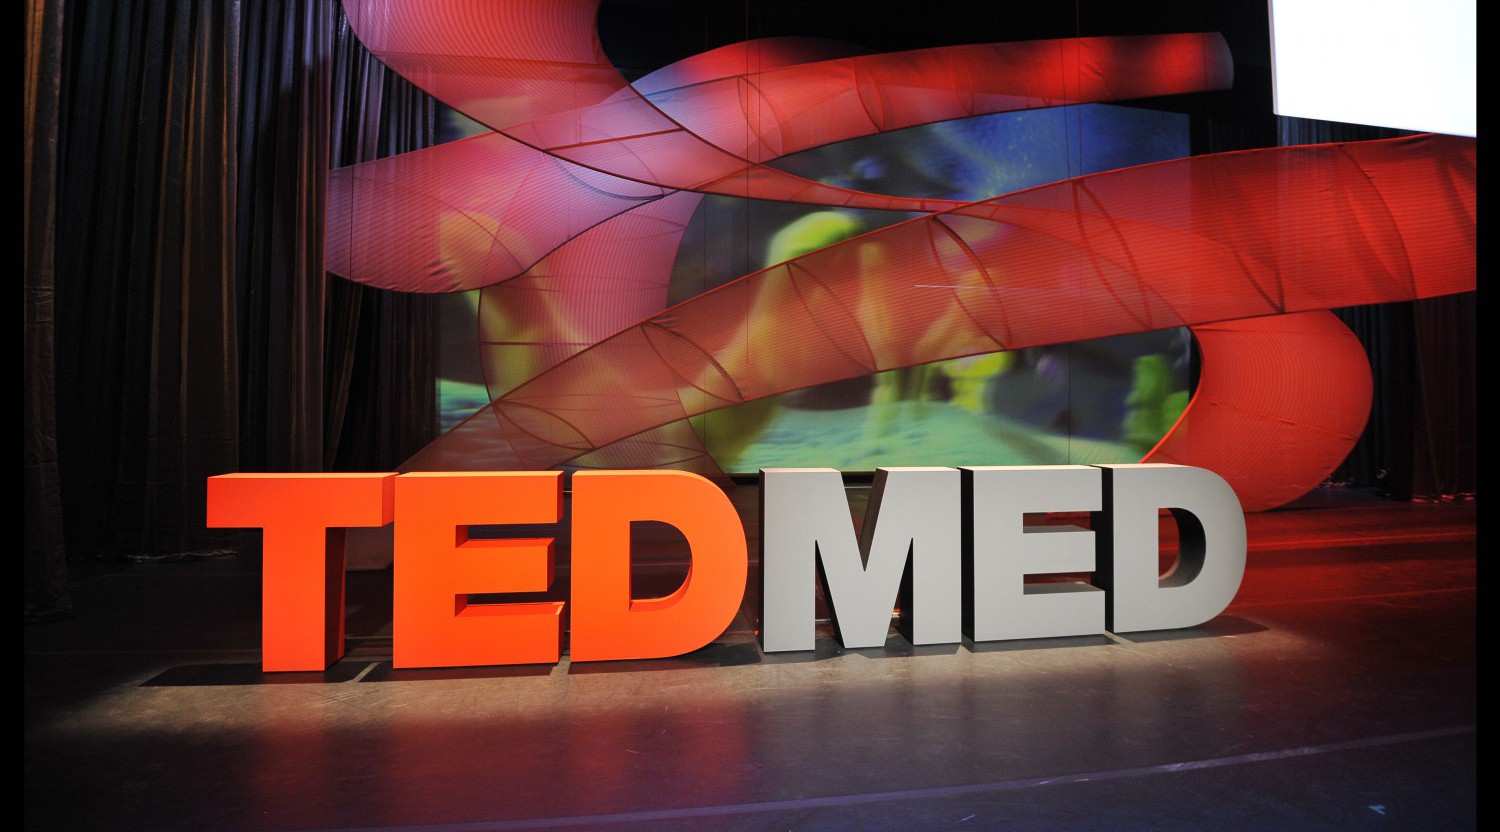 Symphony’s Jonathan Fritz Selected as TEDMED Research Scholar